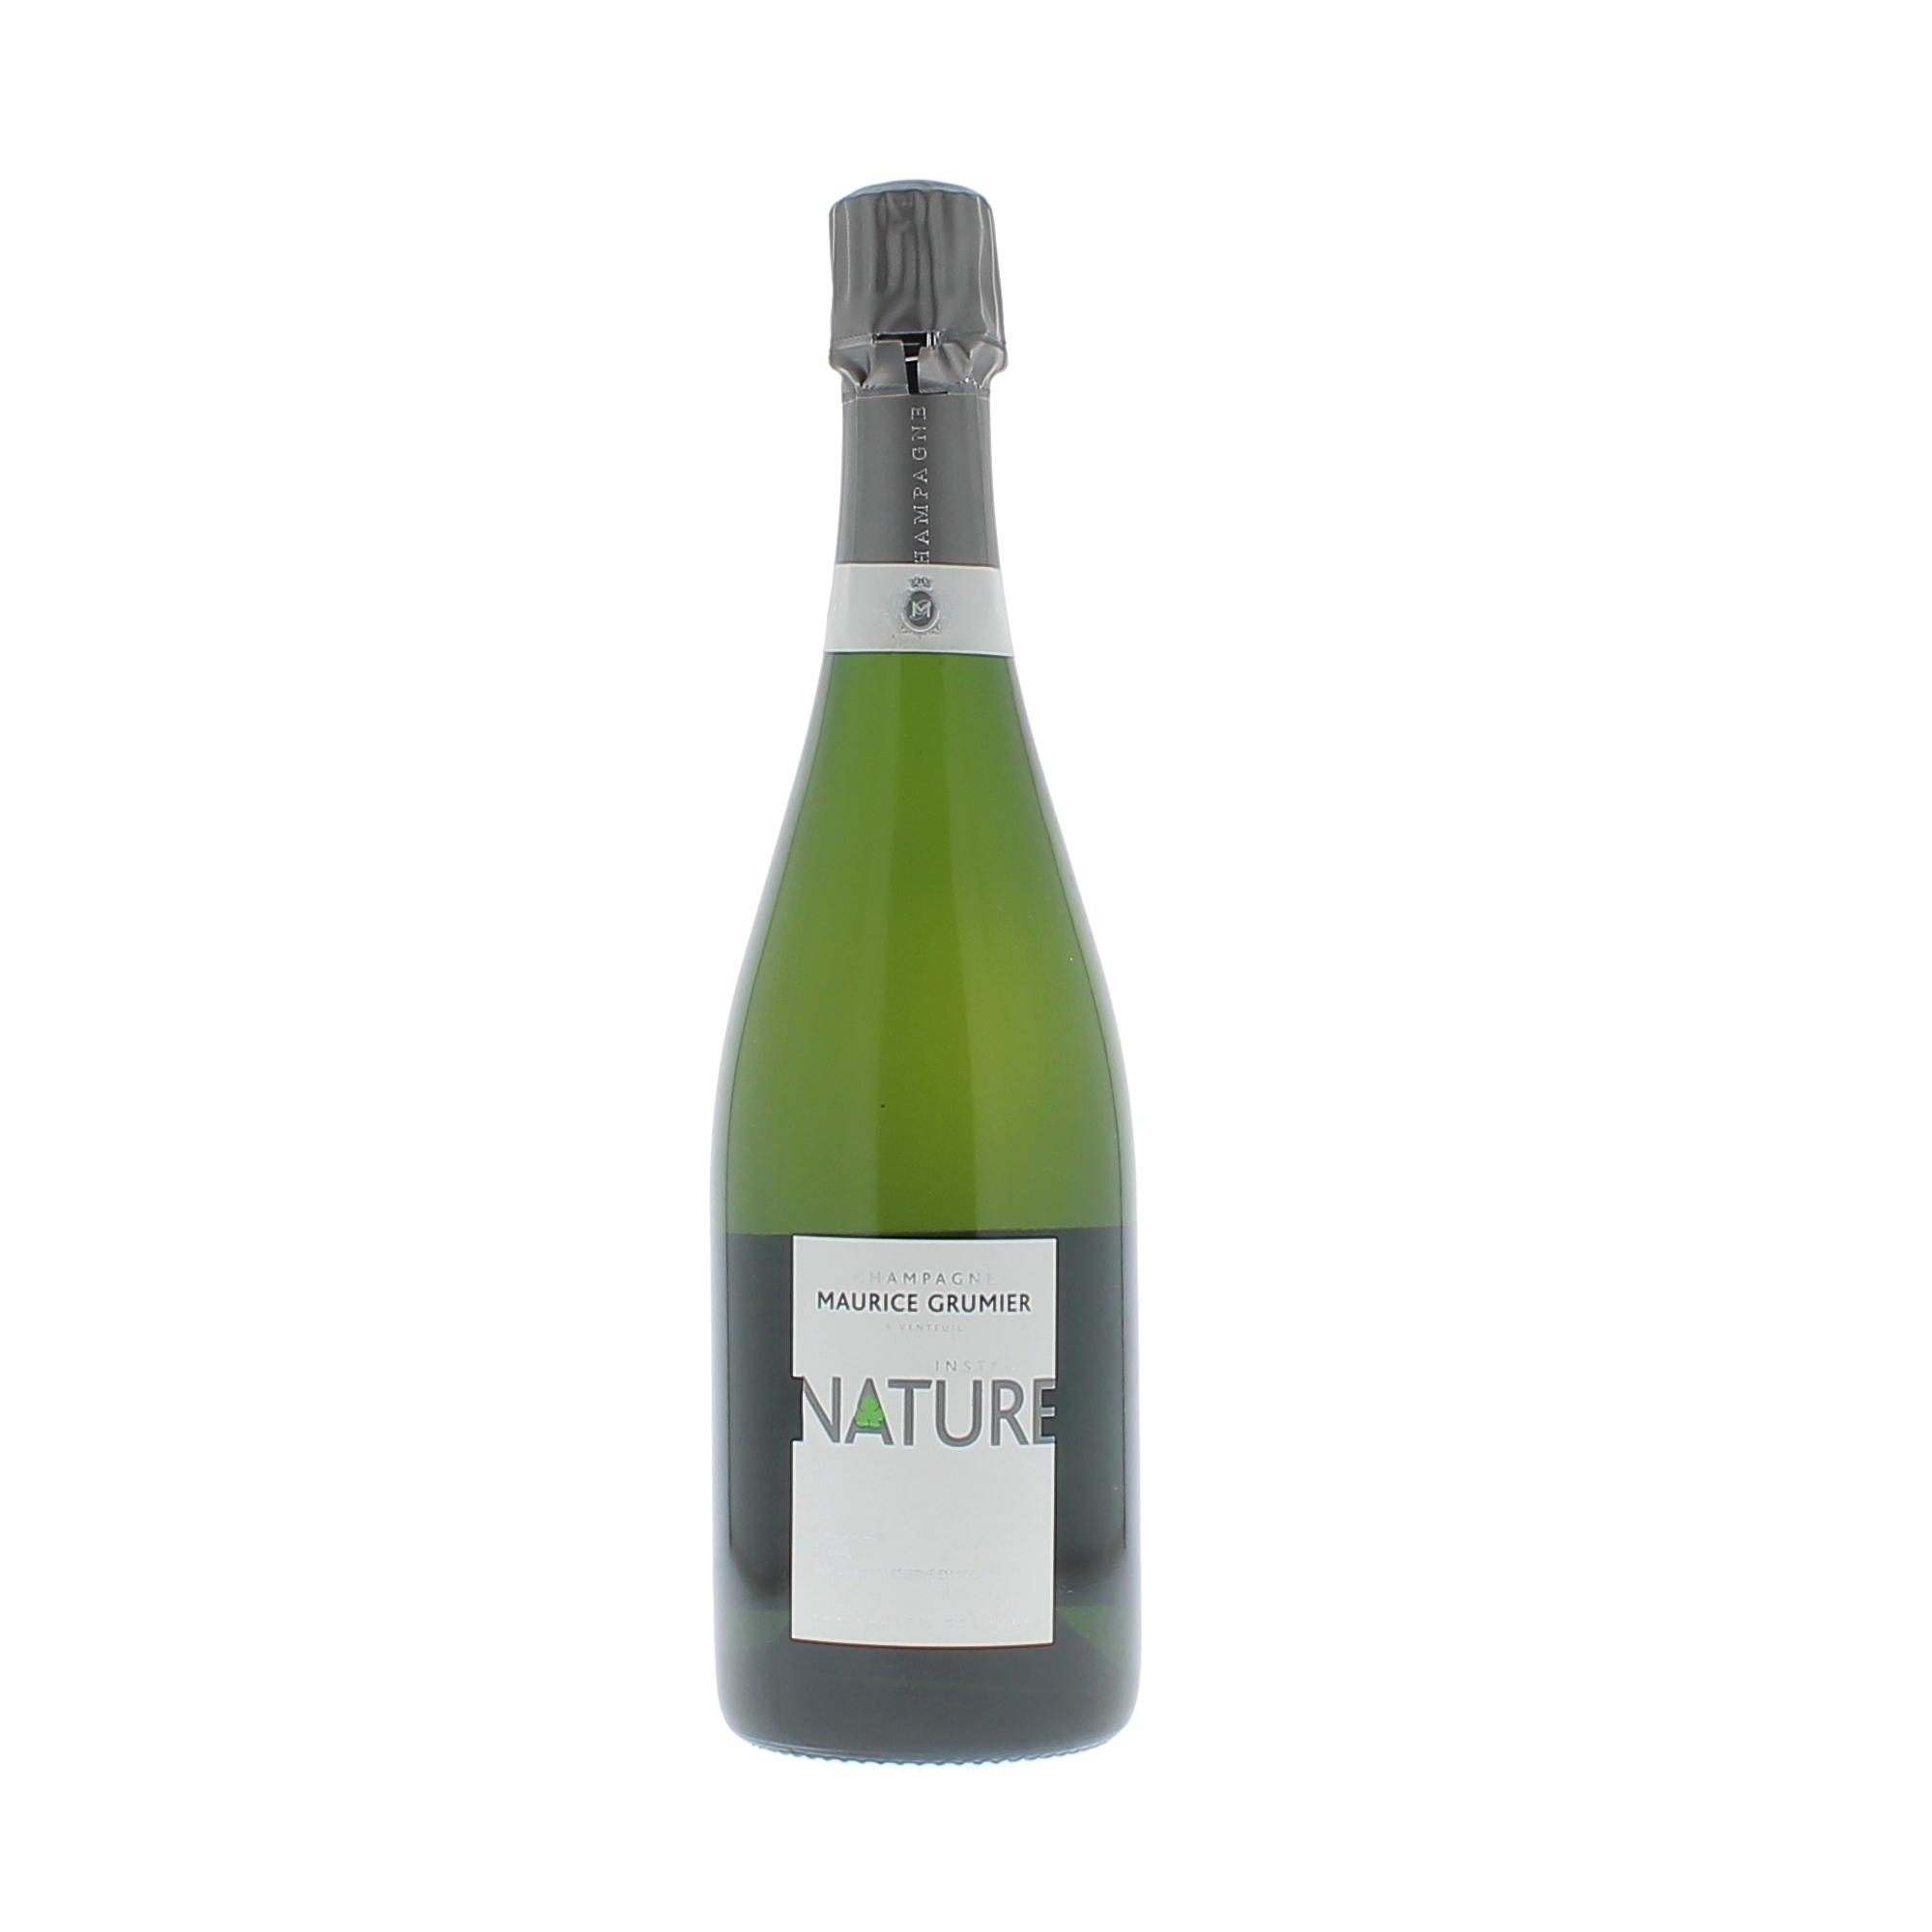 Maurice Grumier Instant Nature Zéro Dosage Champagne